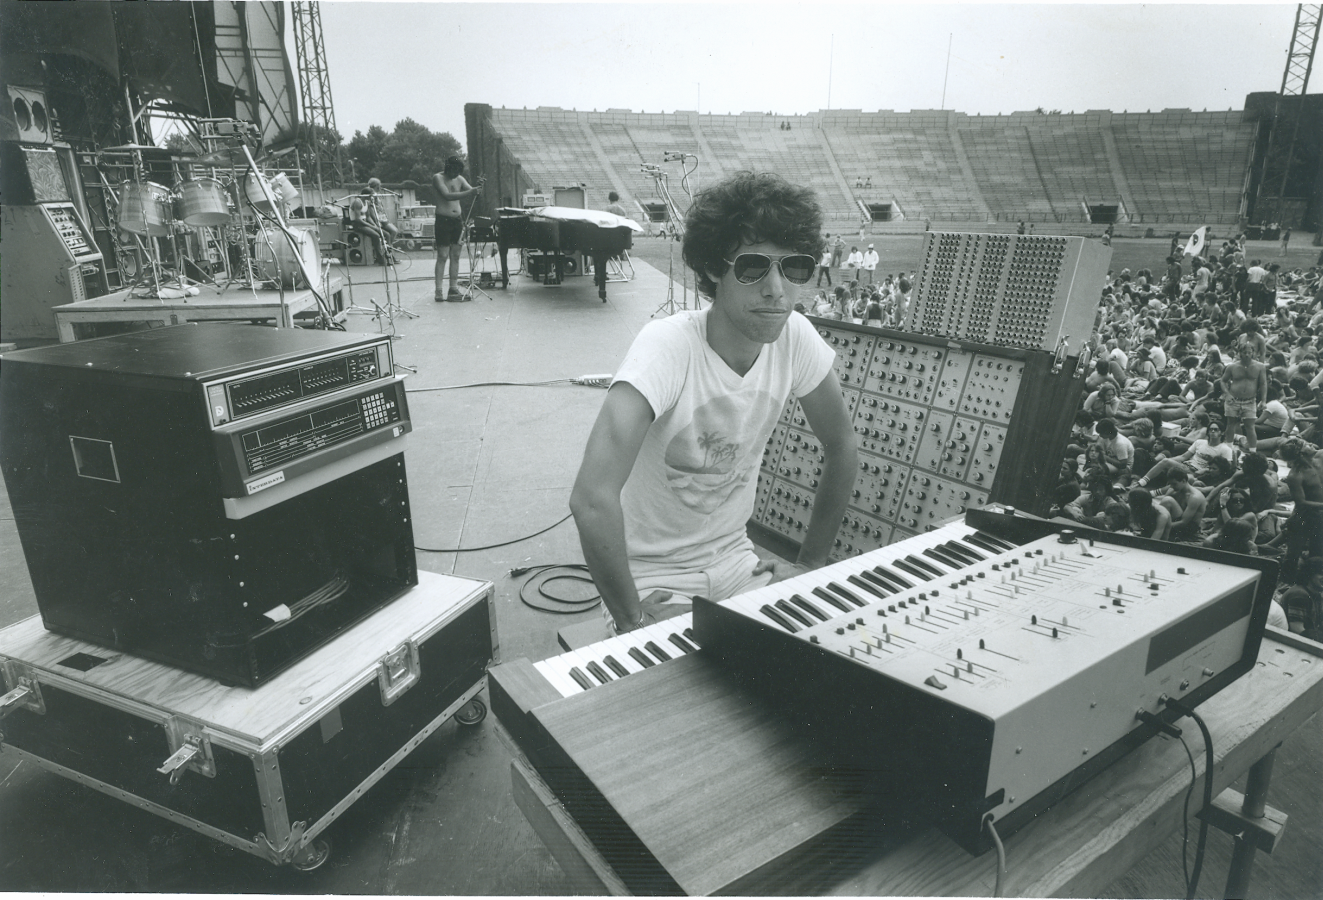 Ned at the August 6, 1974 soundcheck at Roosevelt Stadium (photo courtesy of Ned Lagin)